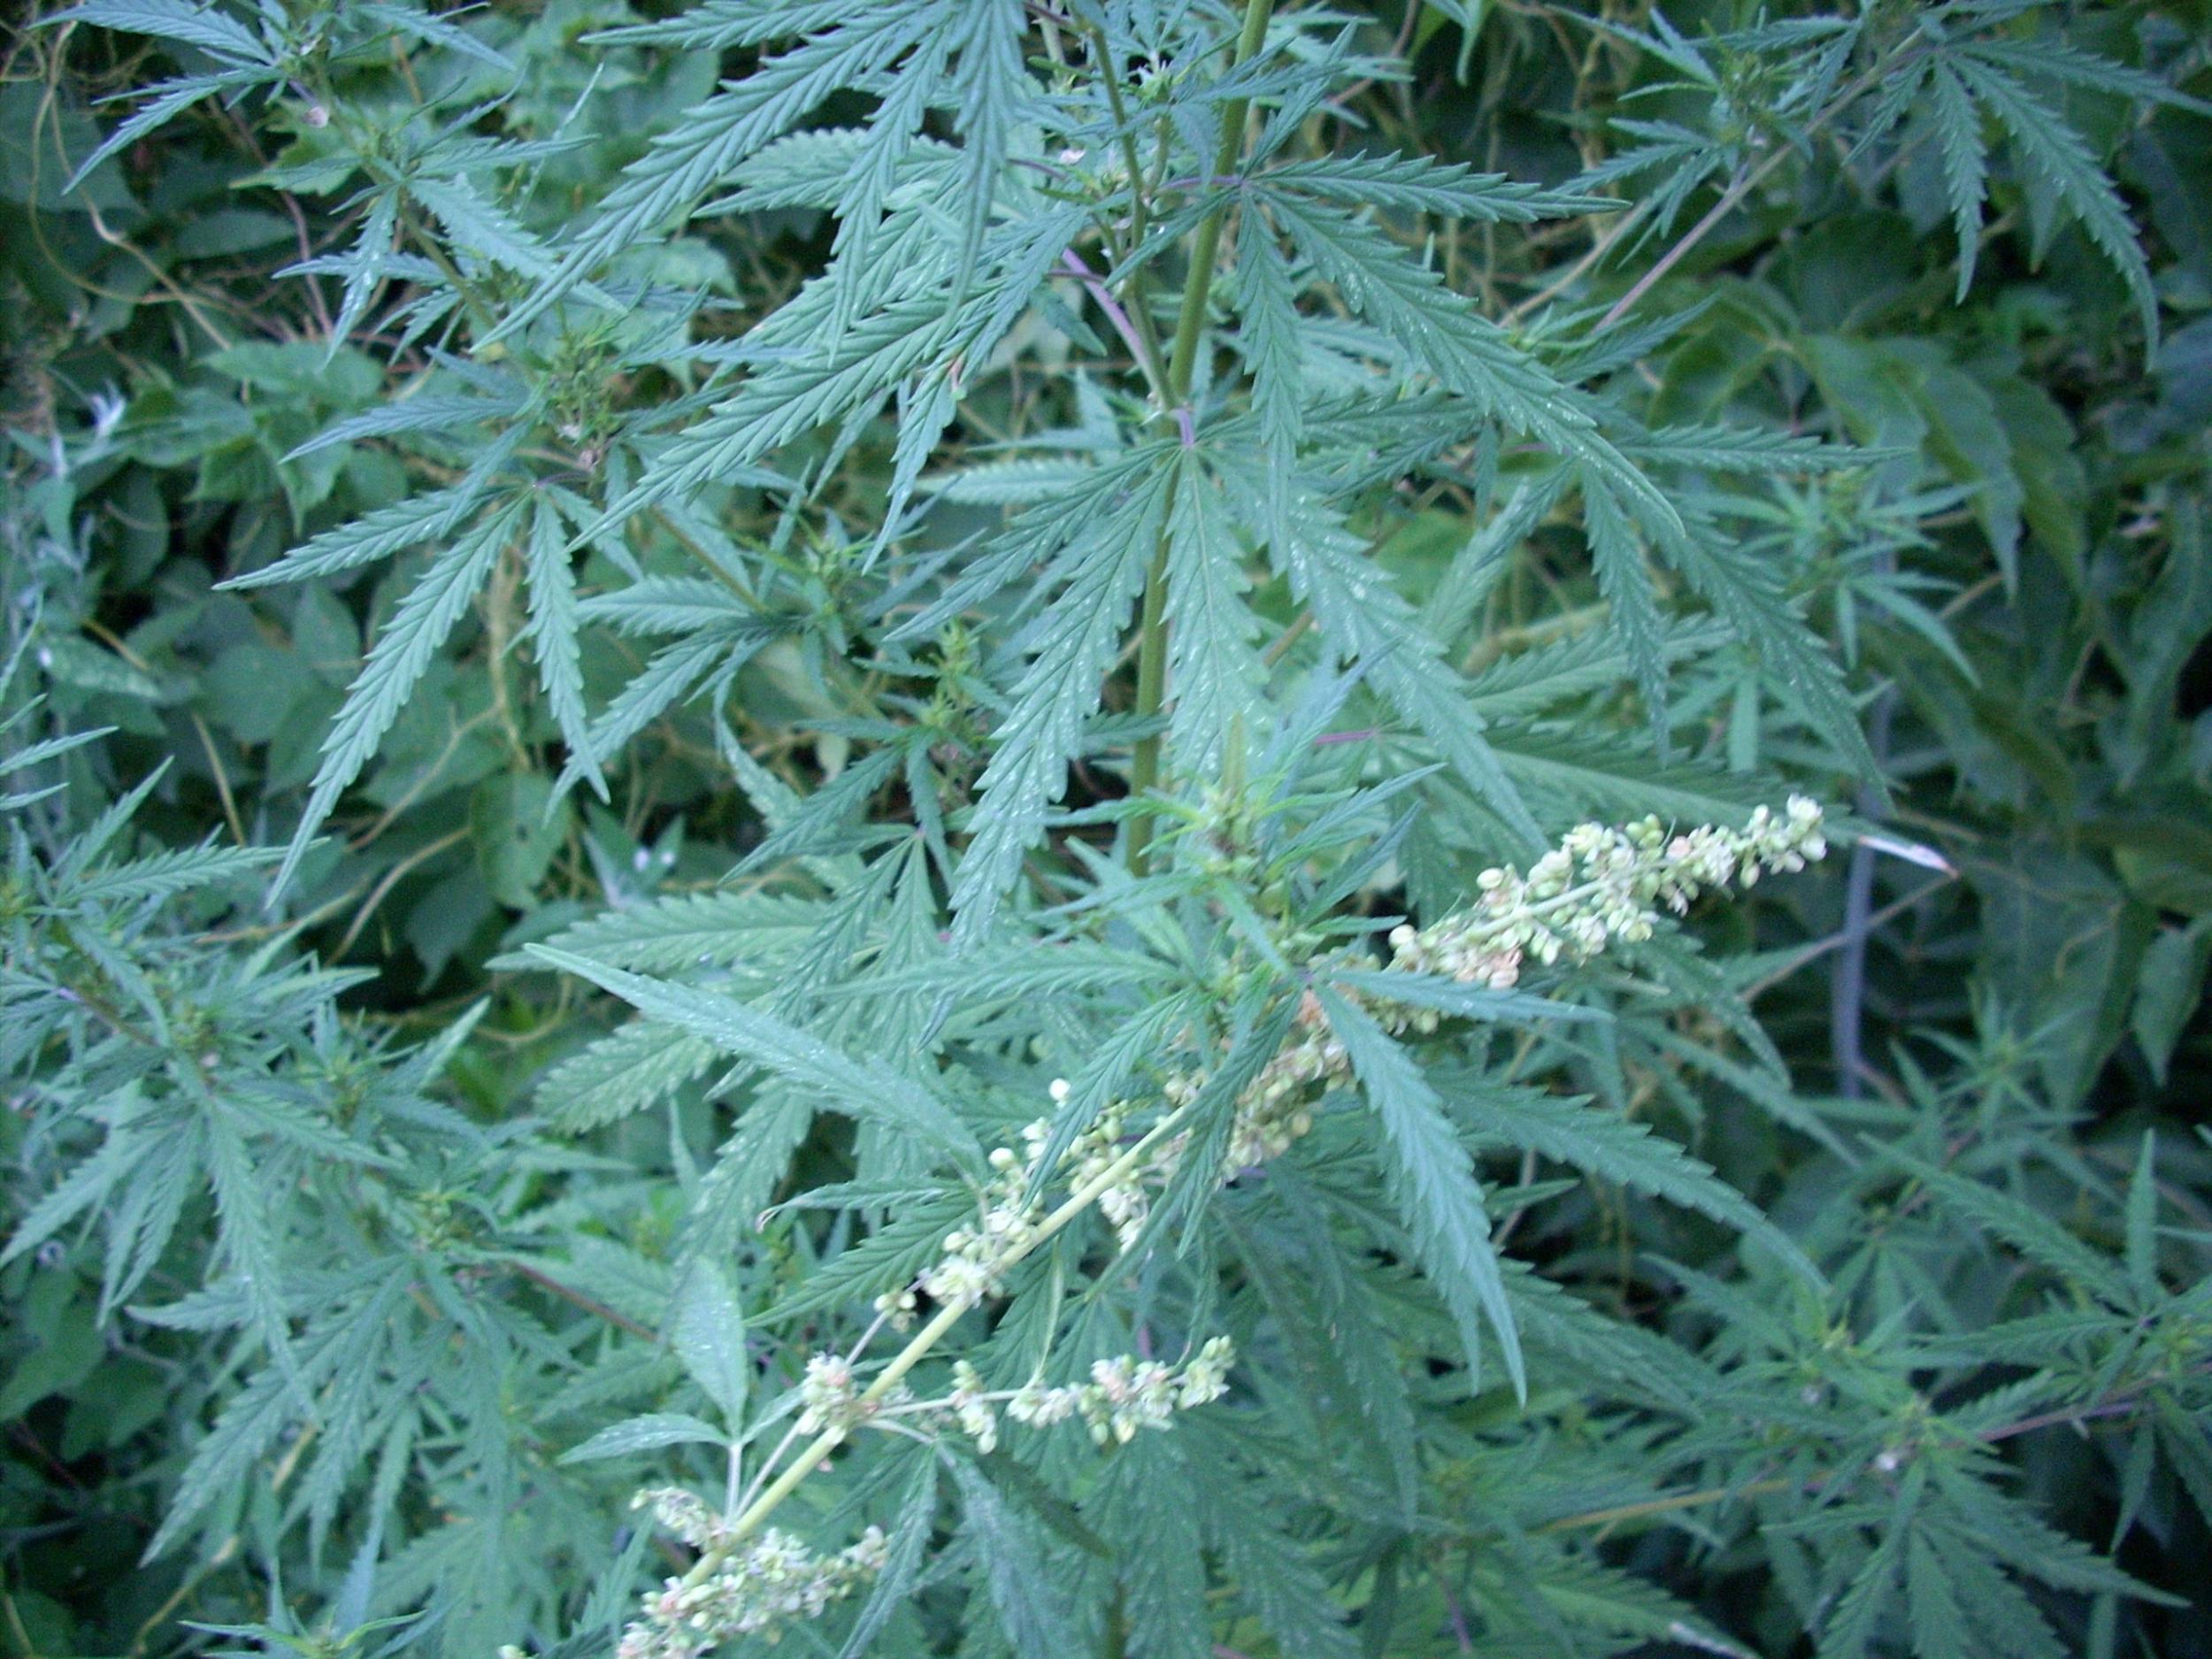 Cannabis plants were cultivated in east Asia for their oily seeds and fibres from at least 4000BC